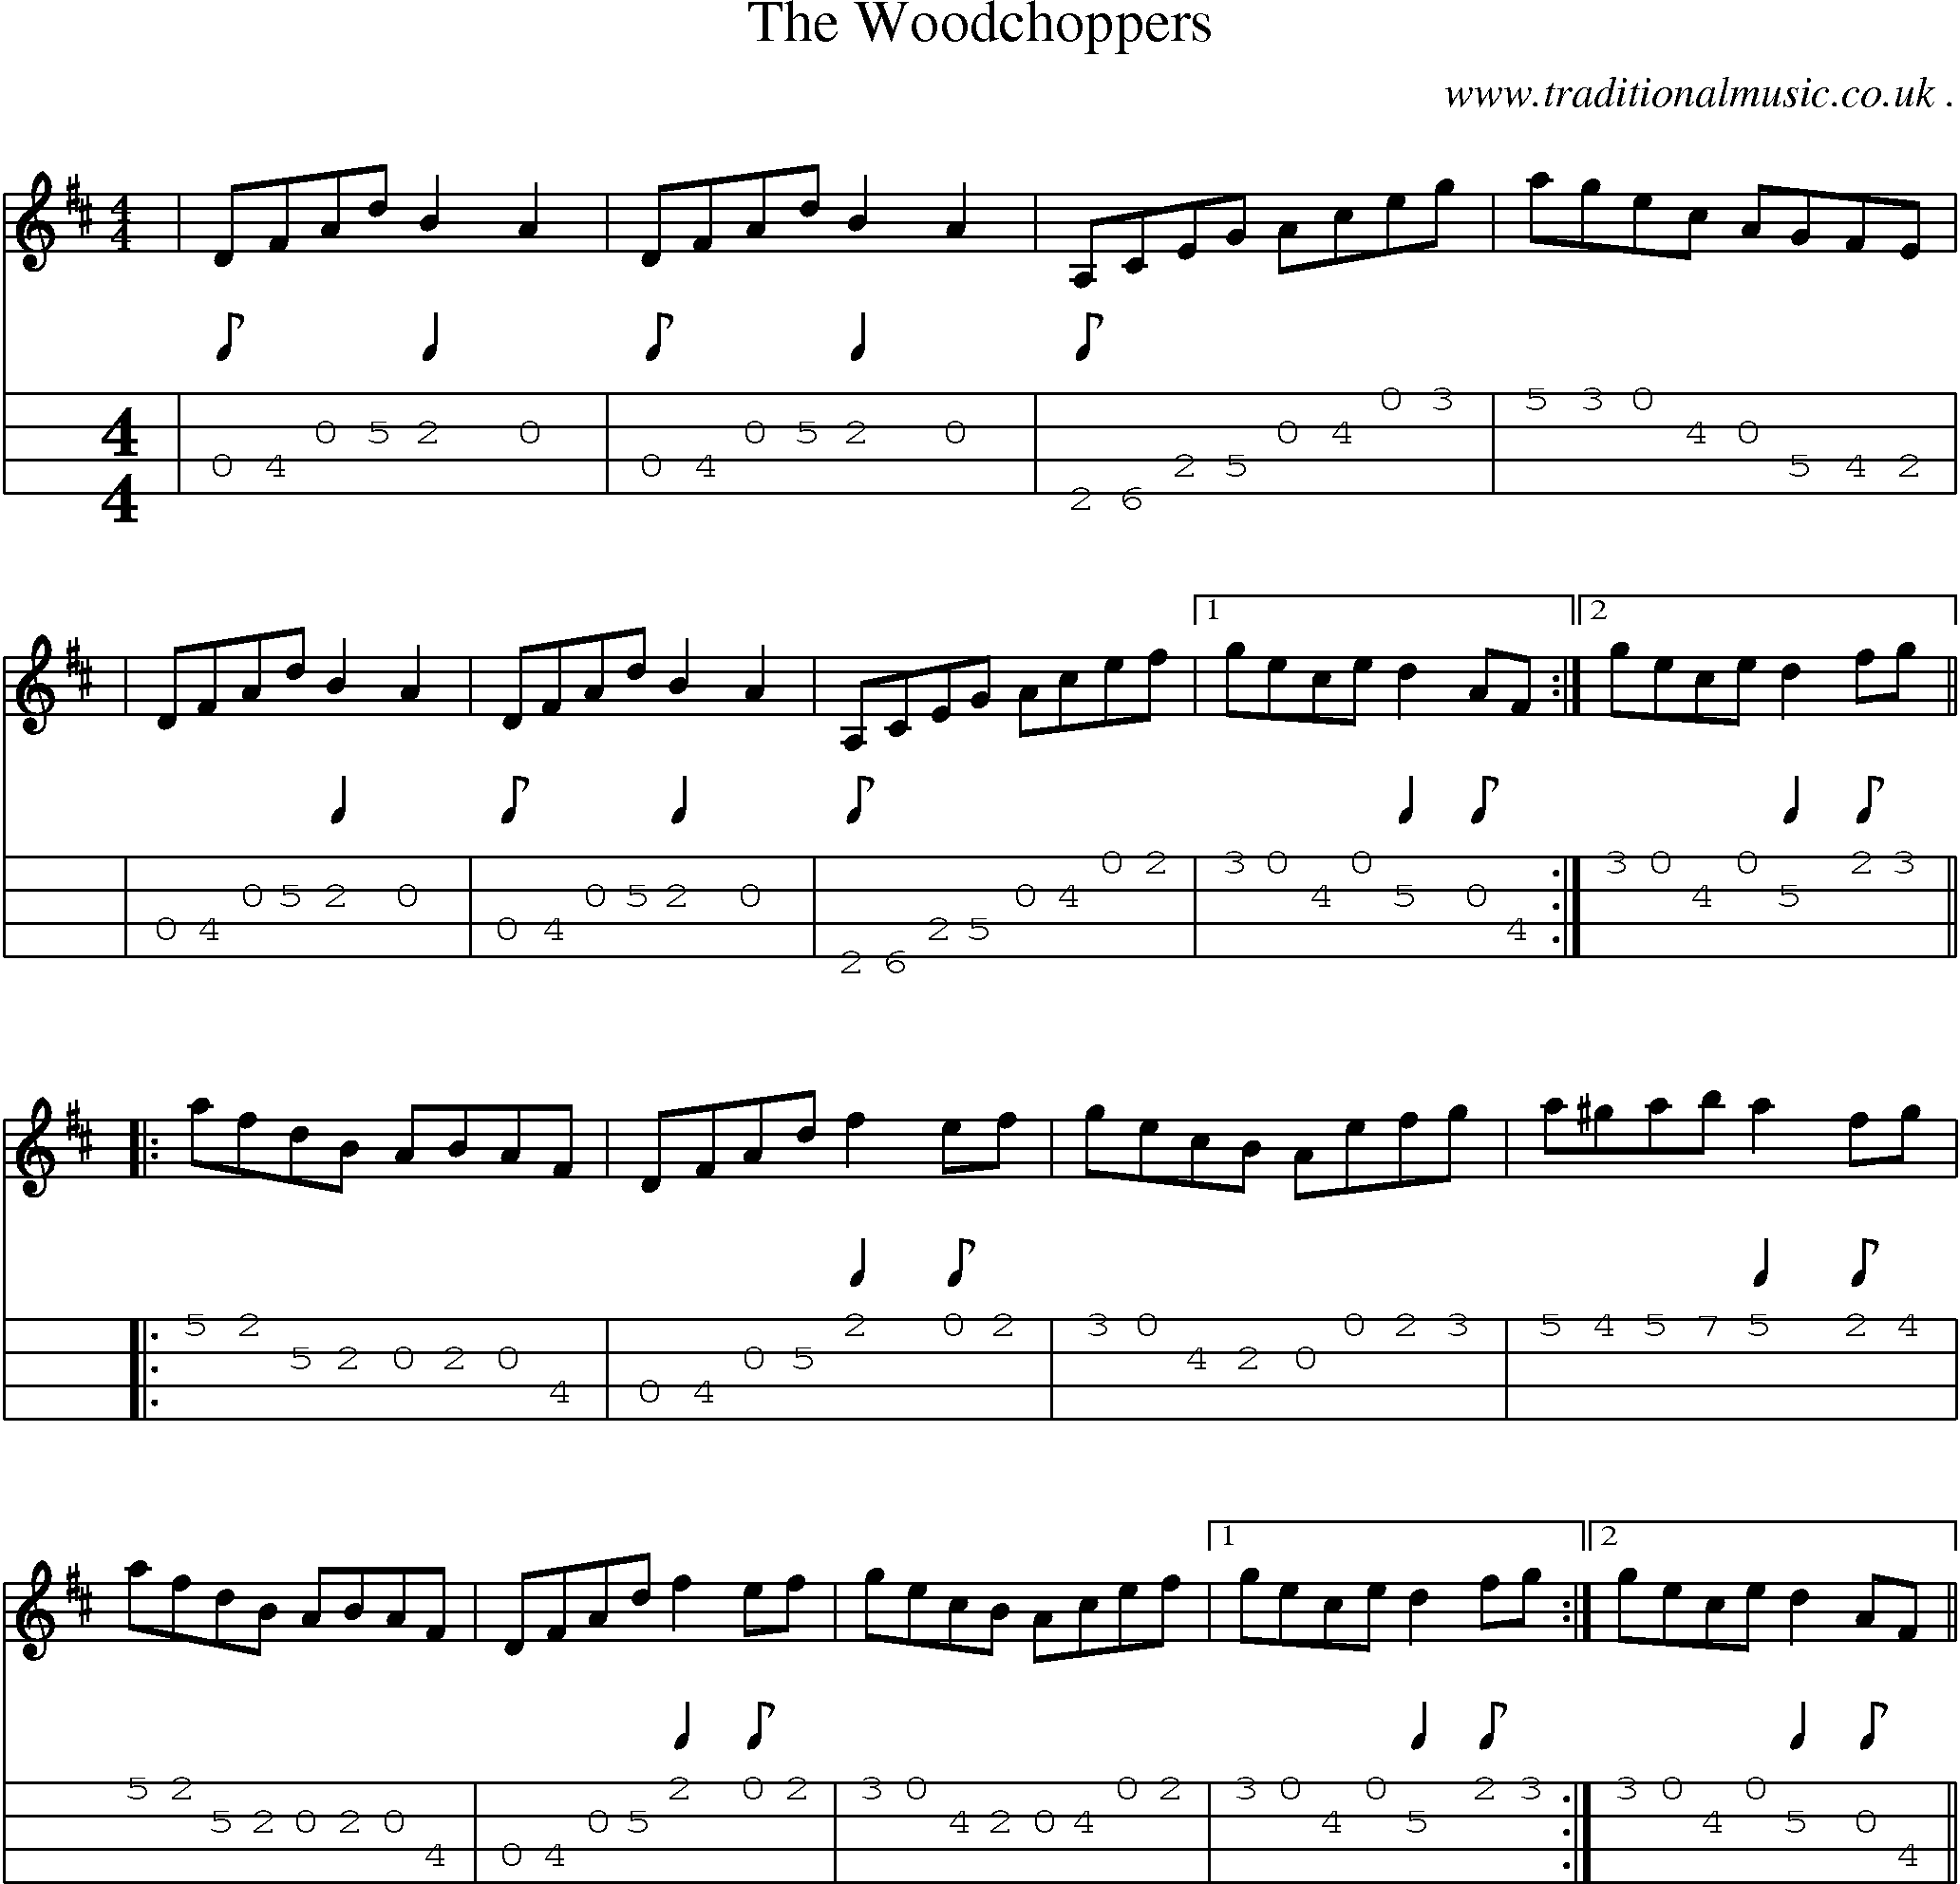 Music Score and Guitar Tabs for The Woodchoppers